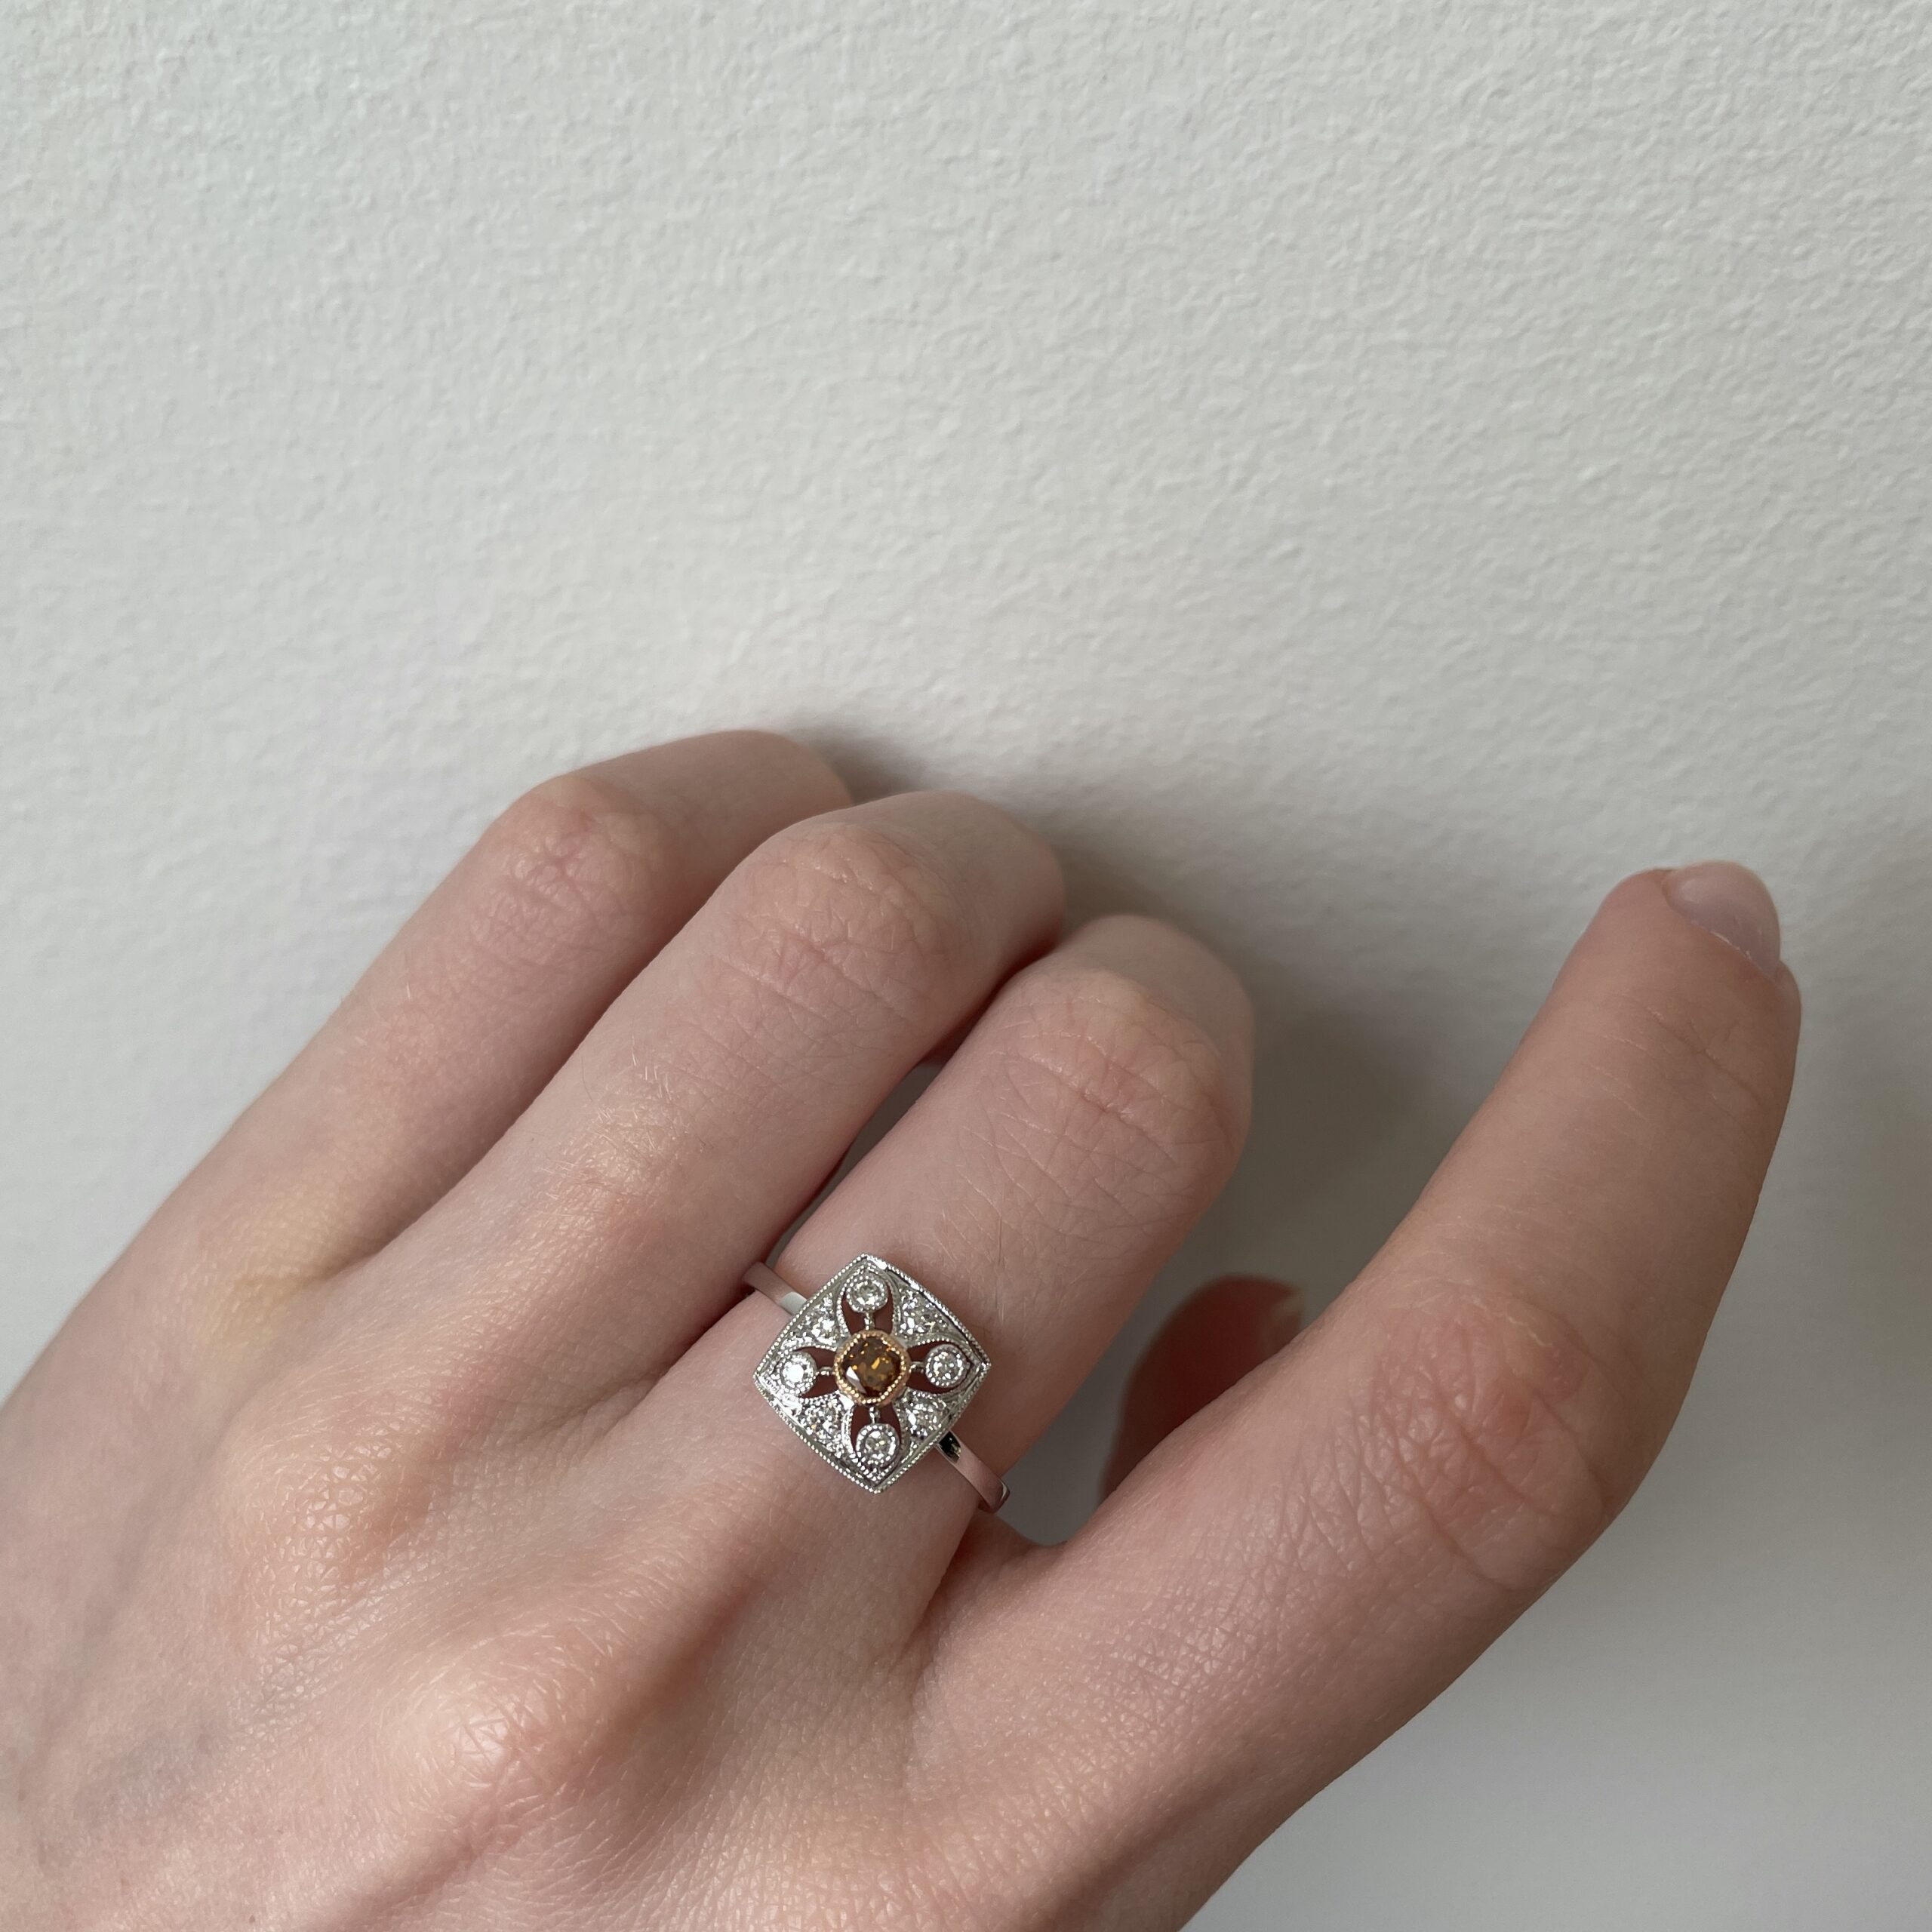 White and Rose Gold White and Brown Diamond Ring